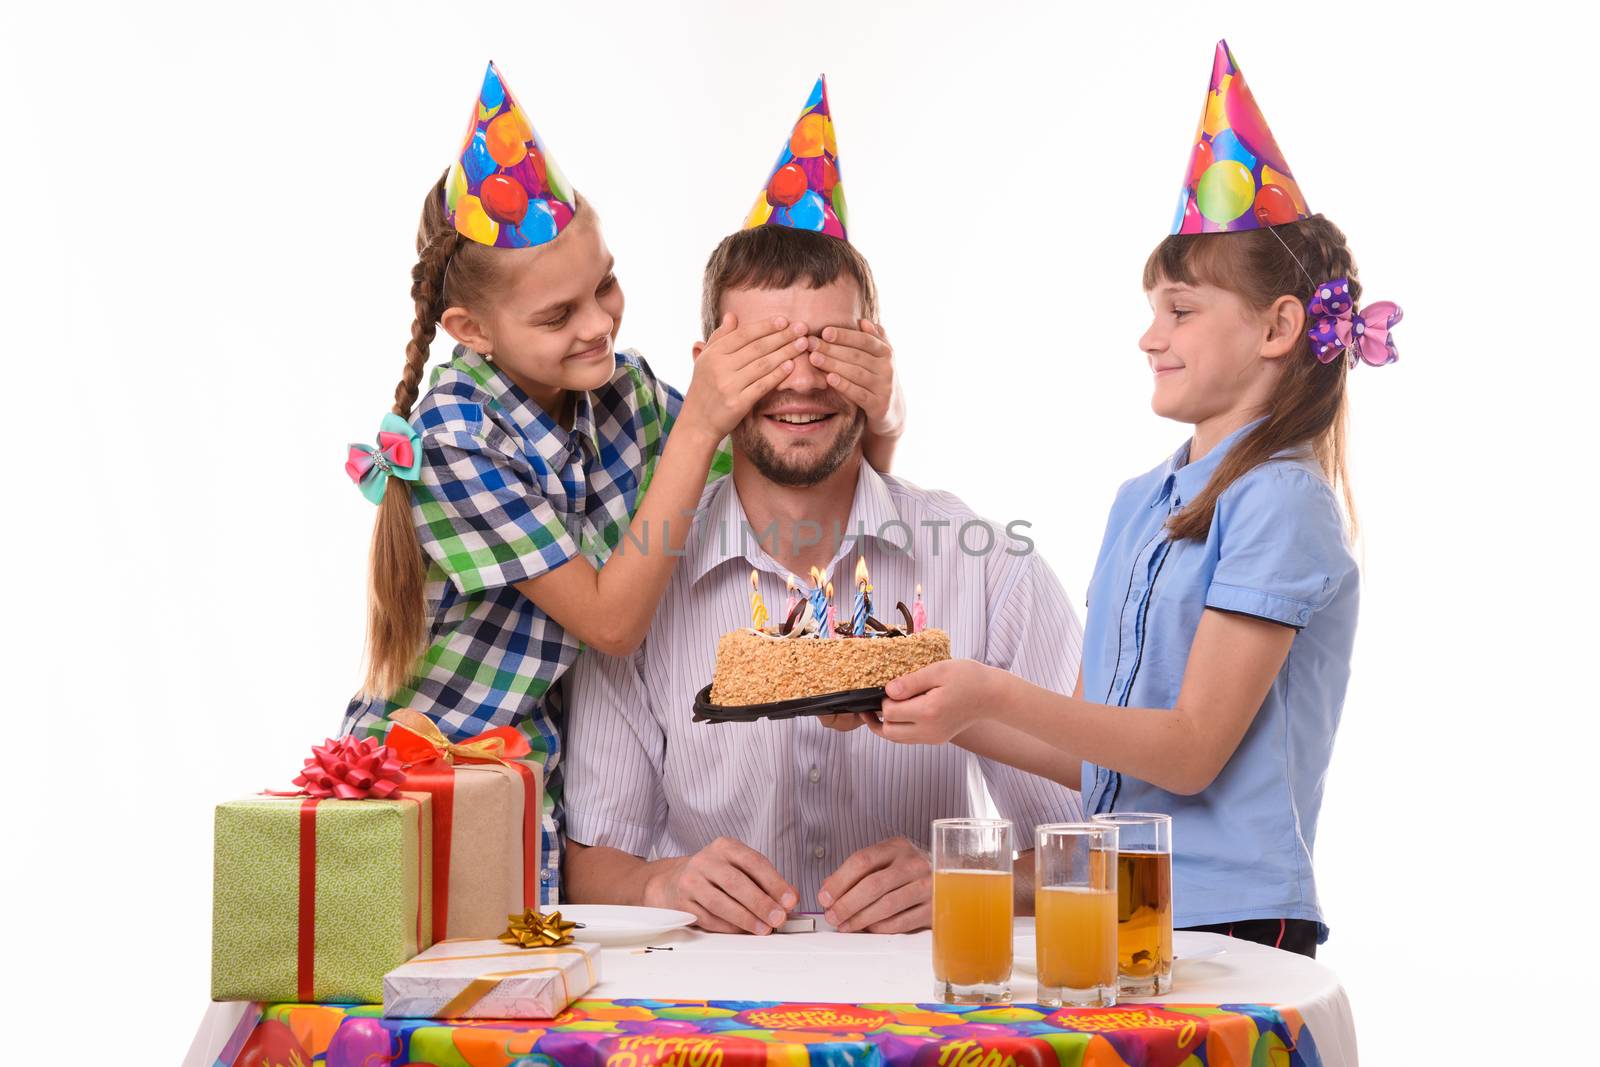 Children give a sweet surprise to dad at a birthday party